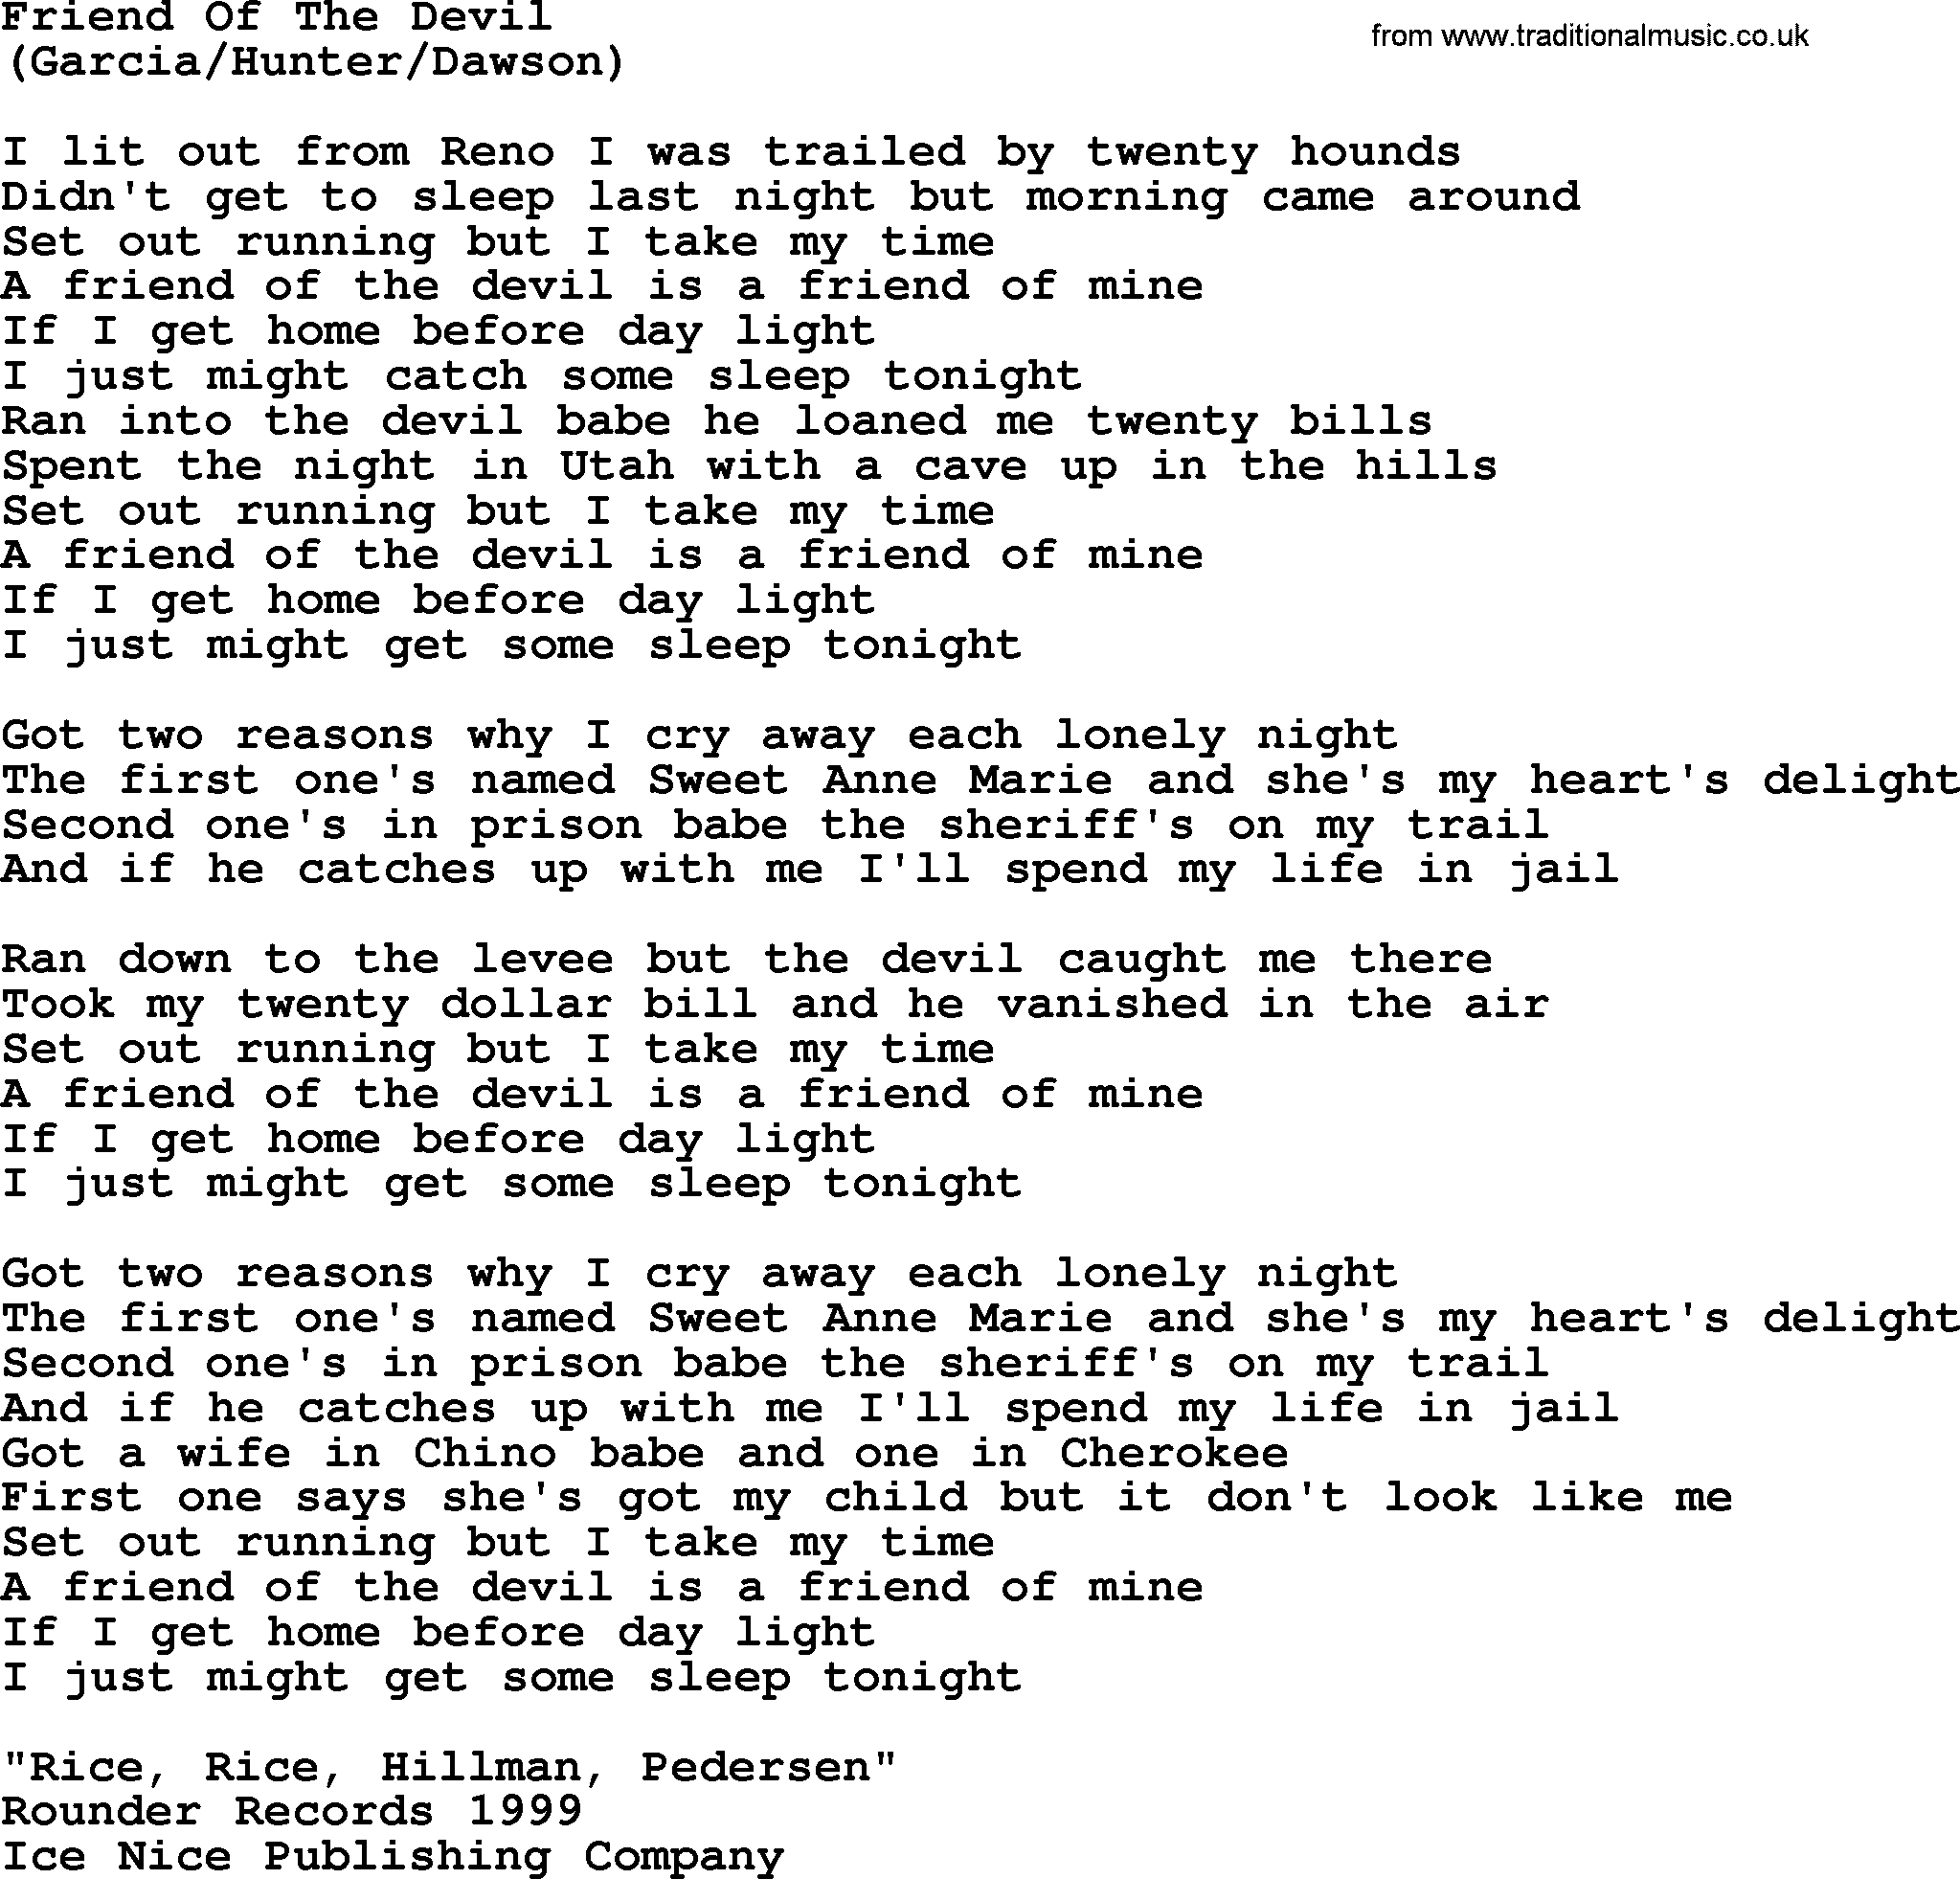 The Byrds song Friend Of The Devil, lyrics